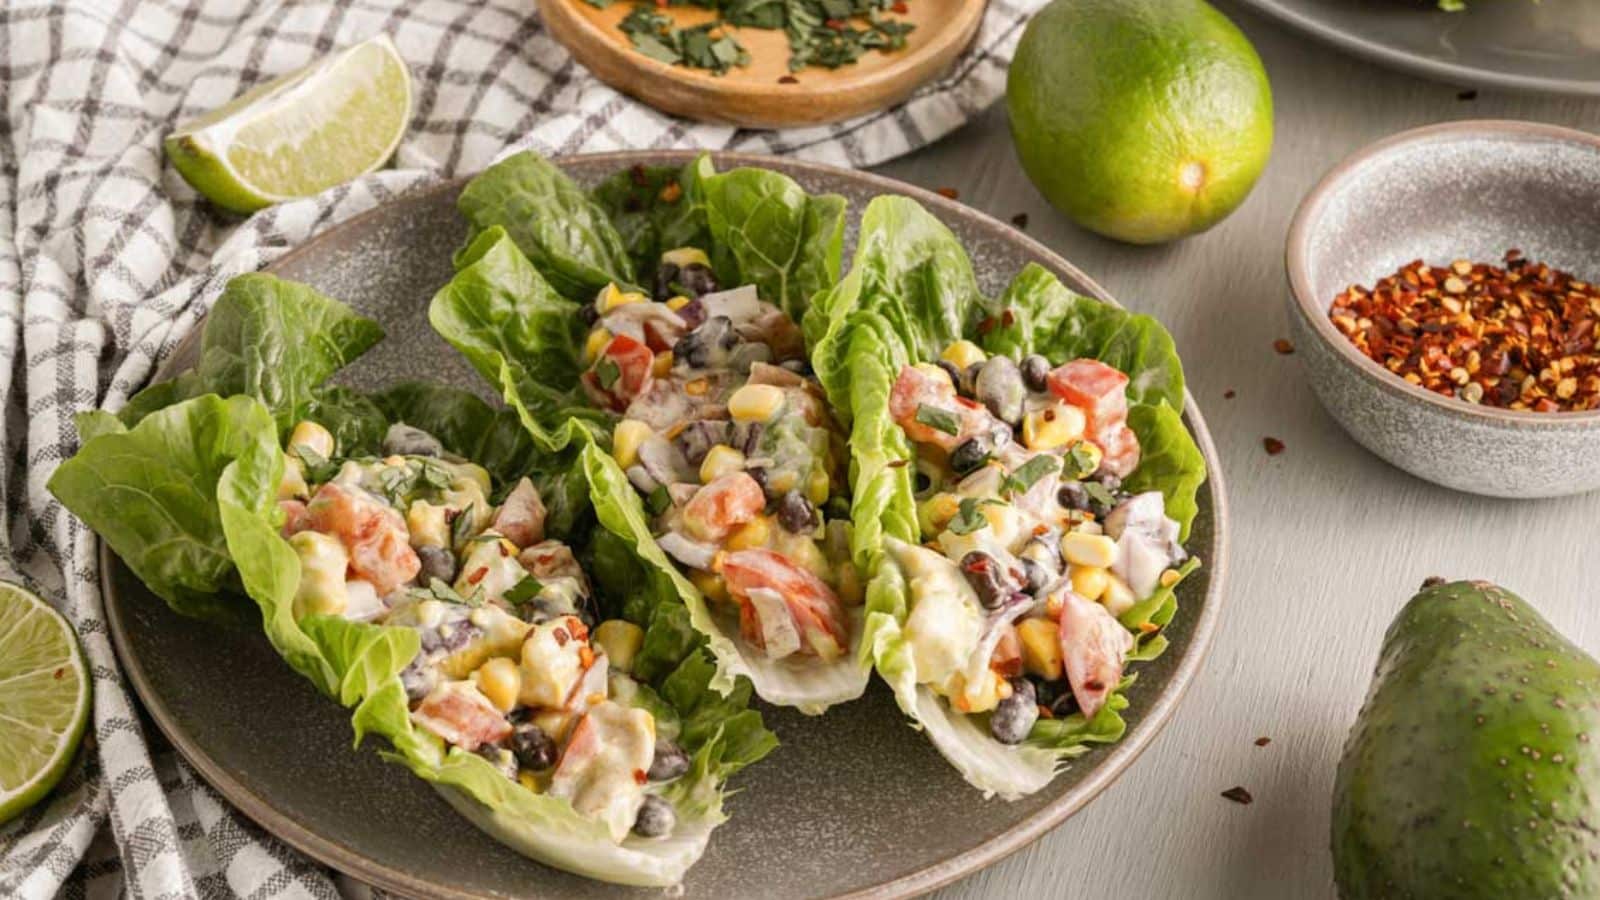 <p>Mexican Lettuce Wraps get thrilling with the sneaky sprinkle of cocoa! It heightens the savory stuff, making the filling super intriguing. Get ready for a bold flavor worthy of a fiesta!<br><strong>Get the Recipe: </strong><a href="https://twocityvegans.com/vegan-mexican-lettuce-wraps/?utm_source=msn&utm_medium=page&utm_campaign=msn" rel="noopener">Healthy Mexican Lettuce Wraps</a></p>